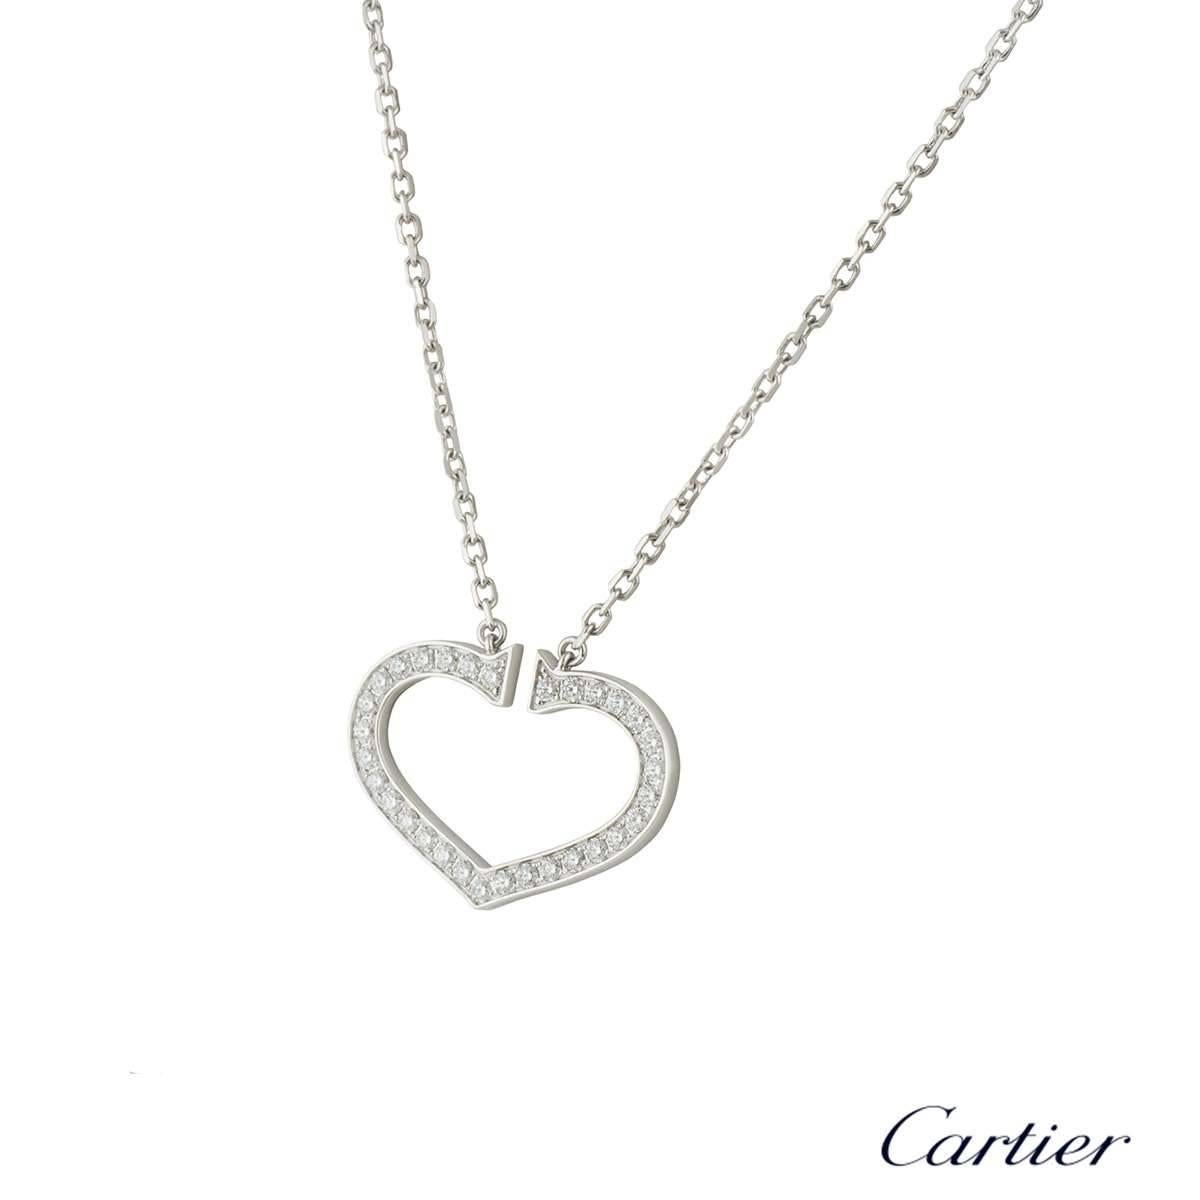 A sparkly 18k white gold Cartier diamond necklace from the Hearts and Symbols collection. The necklace comprises of the iconic heart symbol with 31 round brilliant cut diamonds in a pave setting. The diamonds have a total weight of approximately